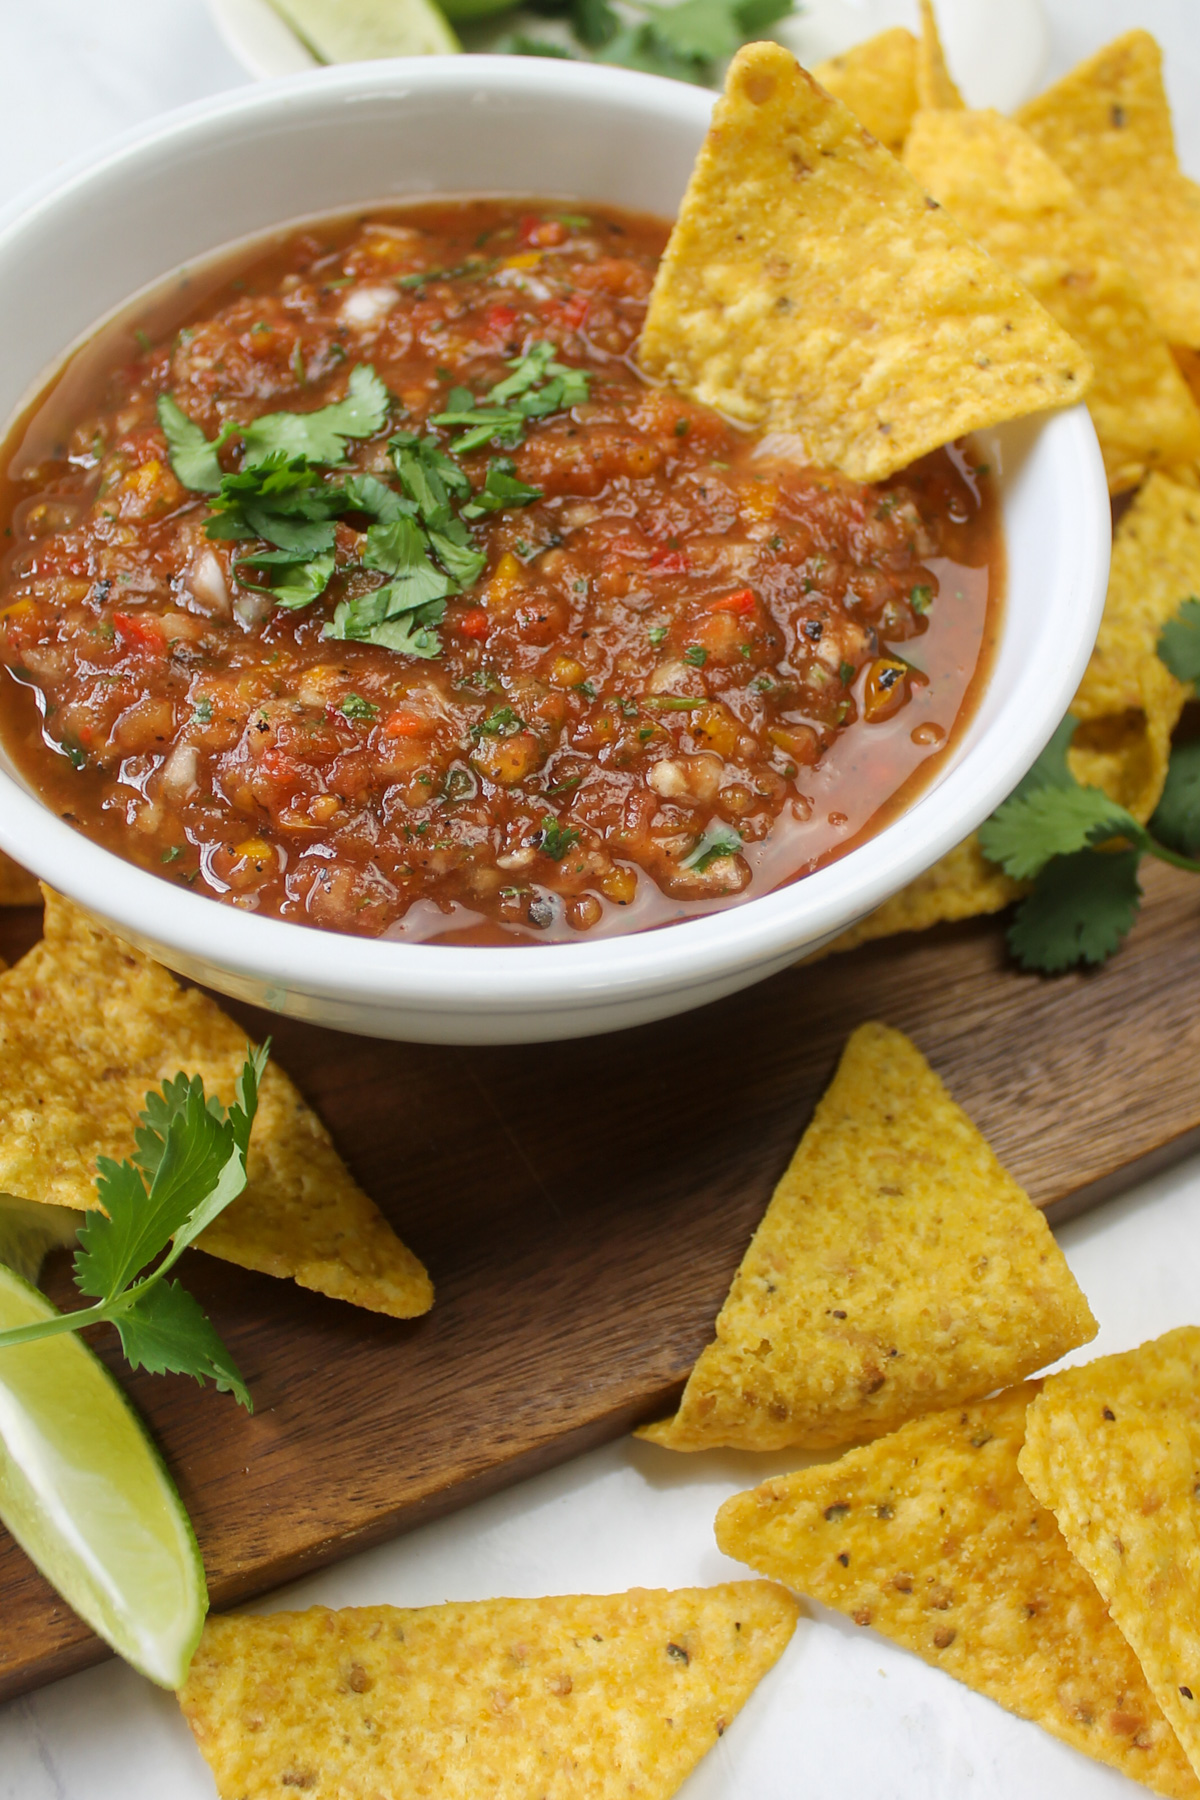 A bowl of salsa with yellow corn tortilla chips to dip.